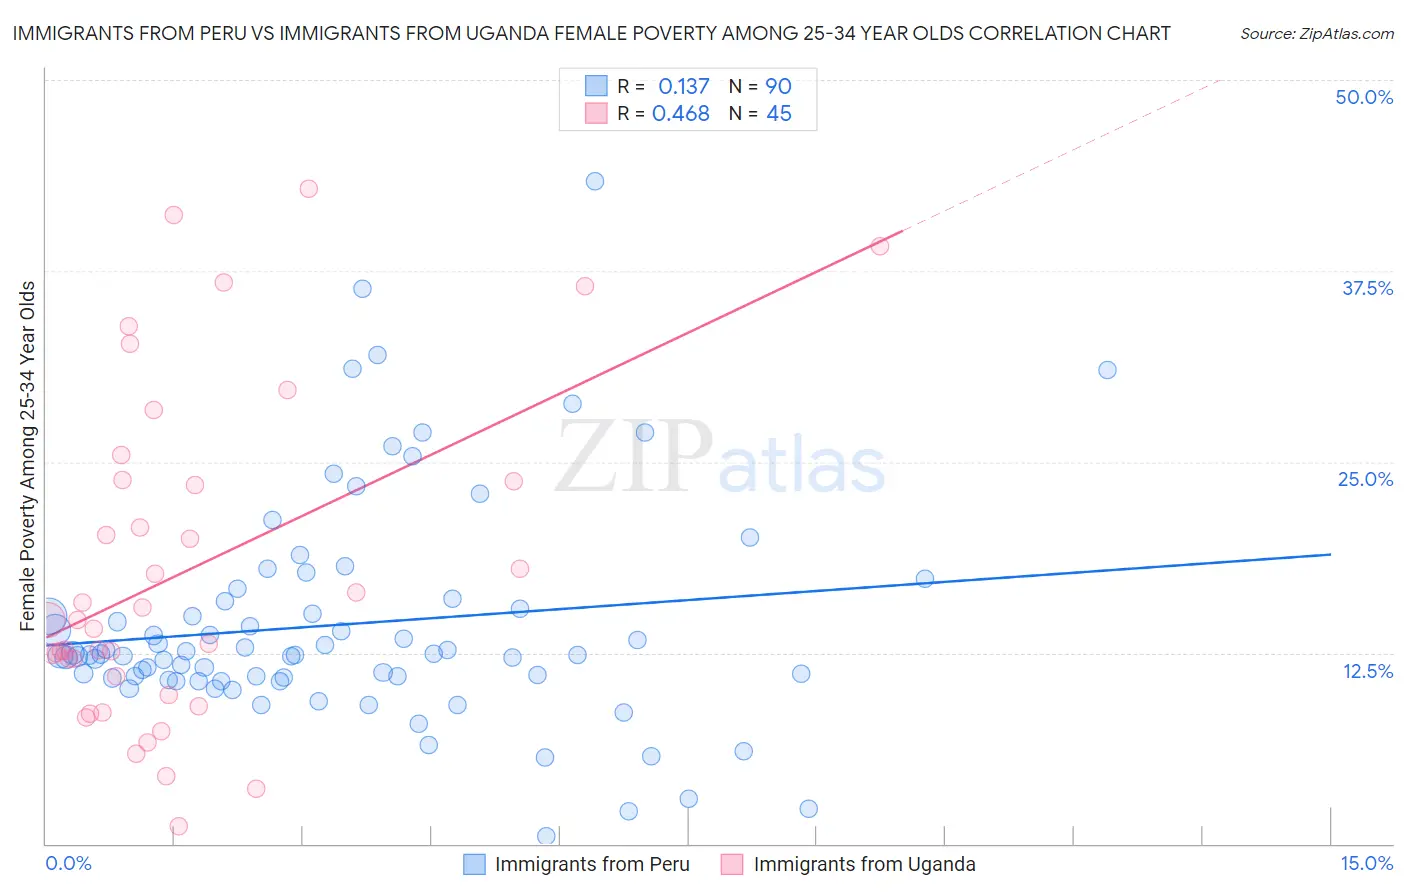 Immigrants from Peru vs Immigrants from Uganda Female Poverty Among 25-34 Year Olds